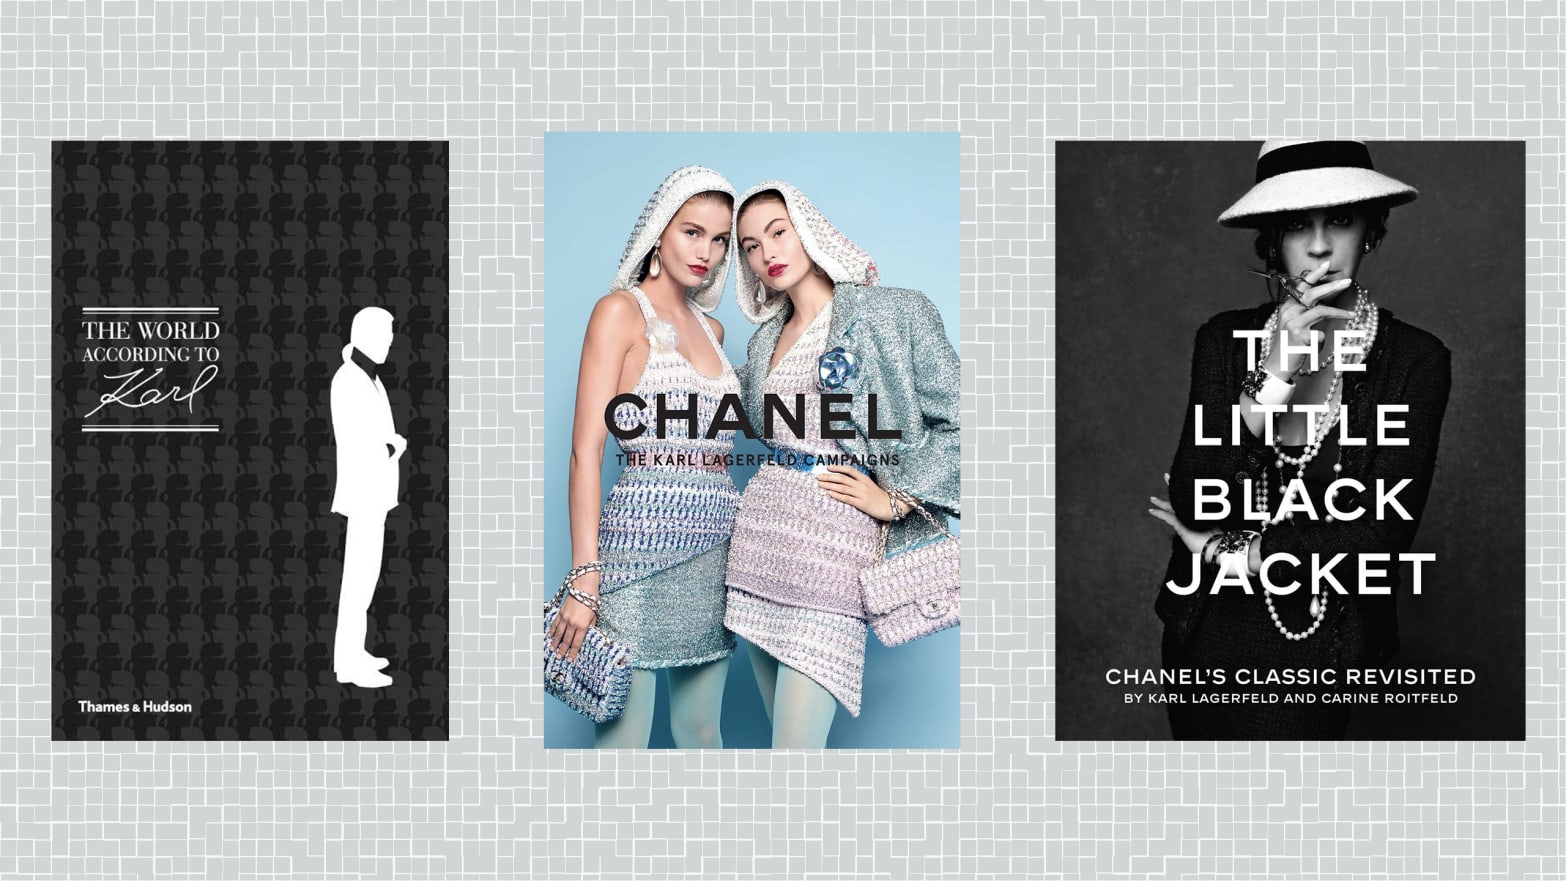 Karl Lagerfeld Books That Span His Chanel Fashion and Photography